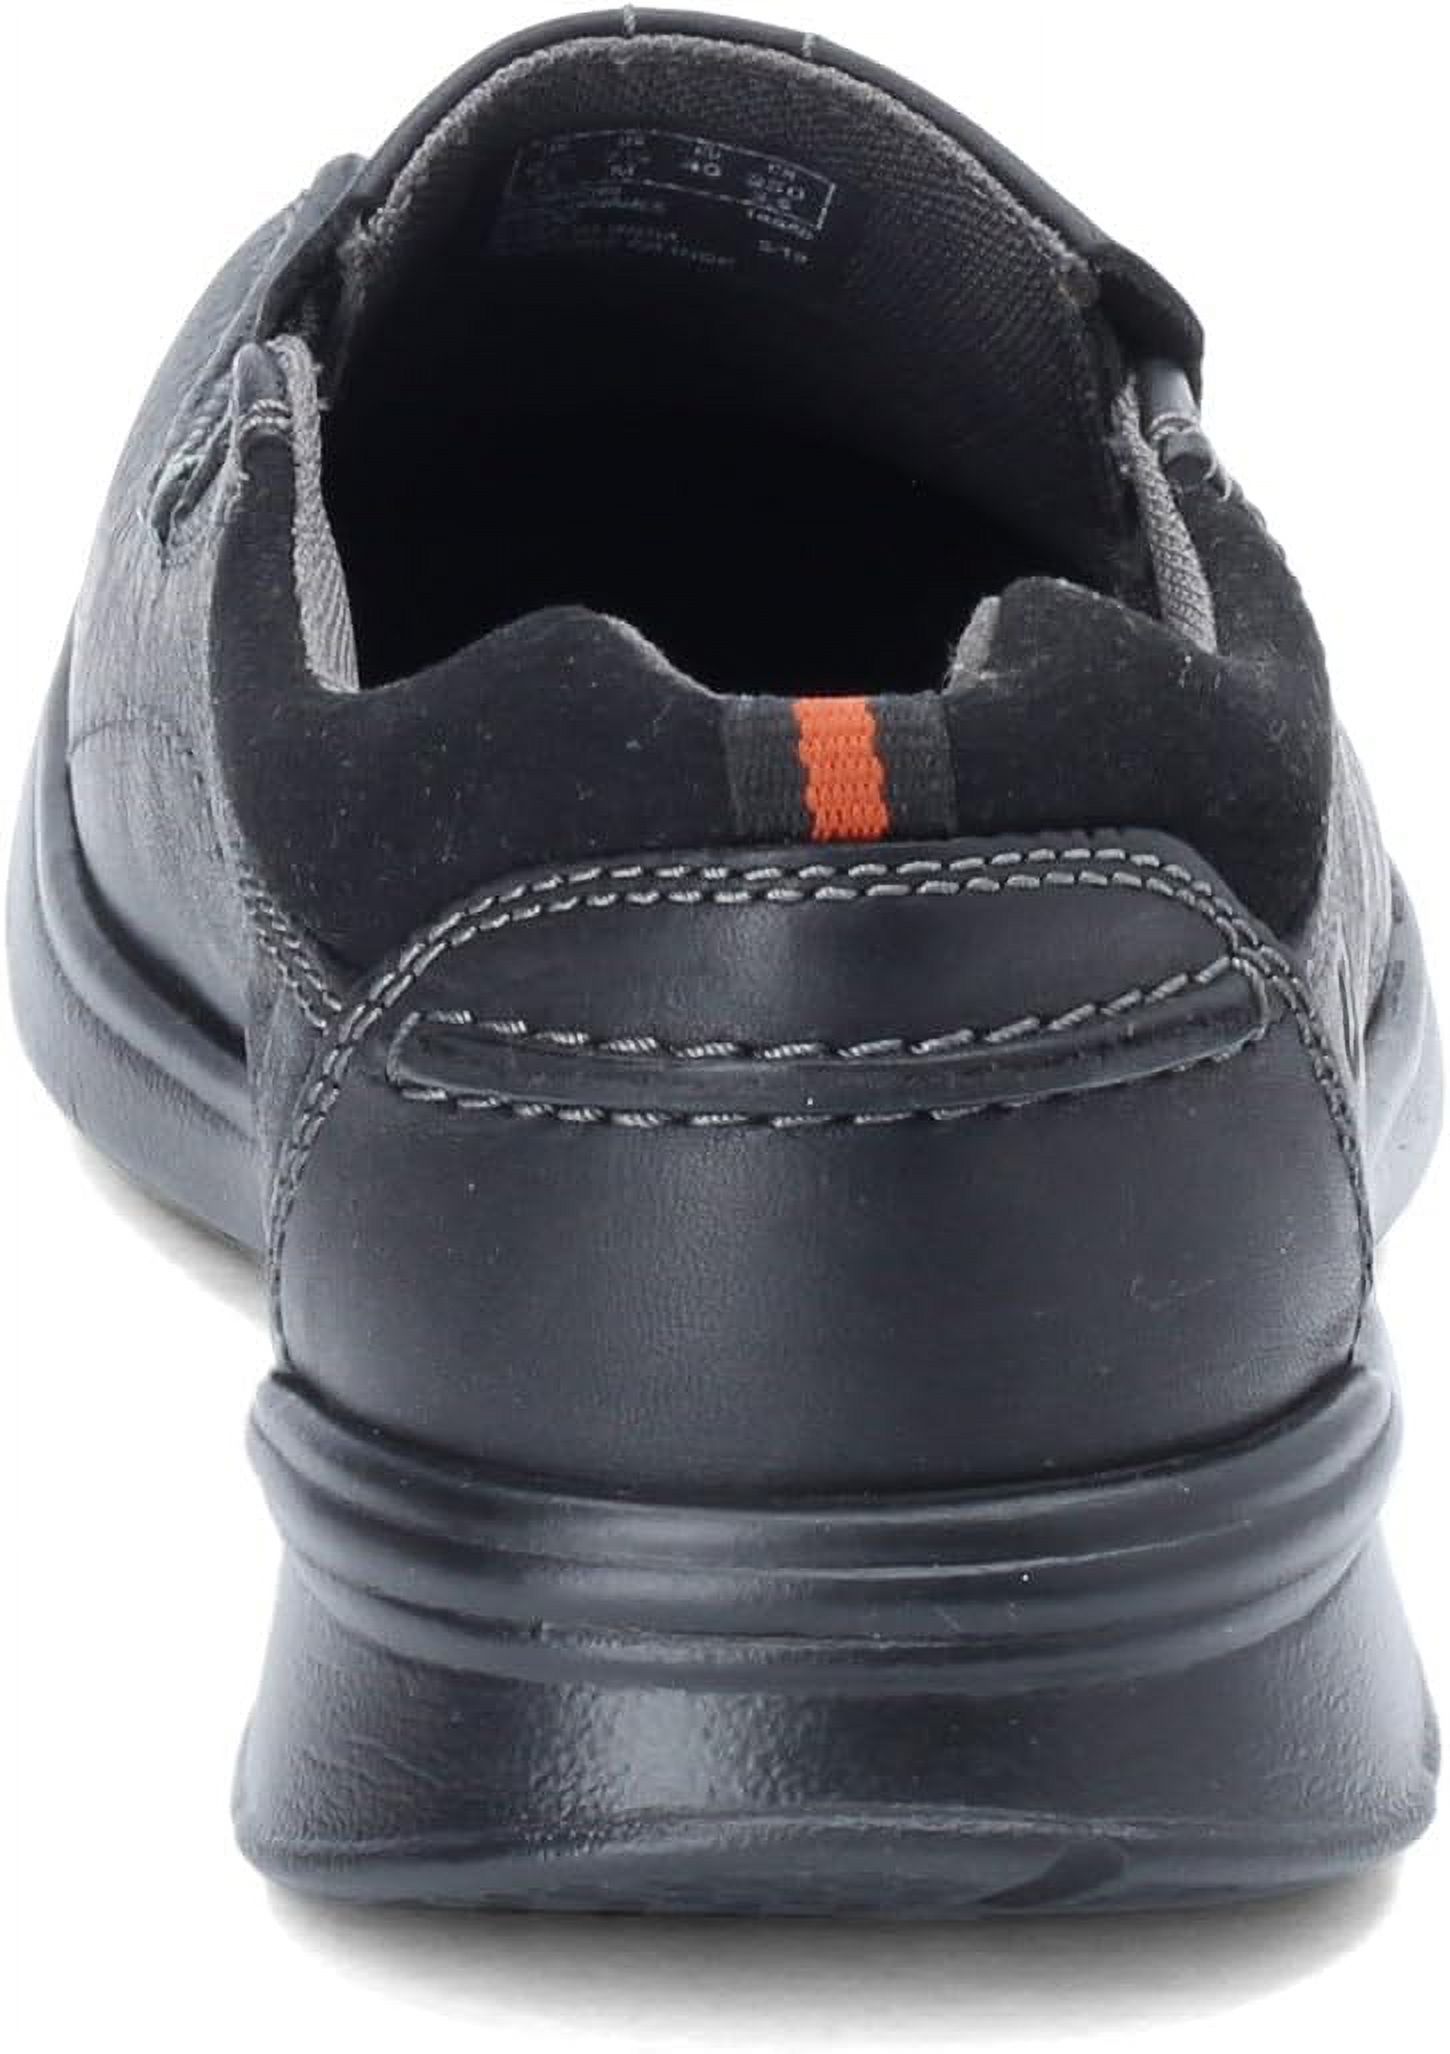 Men's Cotrell Step Bicycle Toe Shoe - image 5 of 7